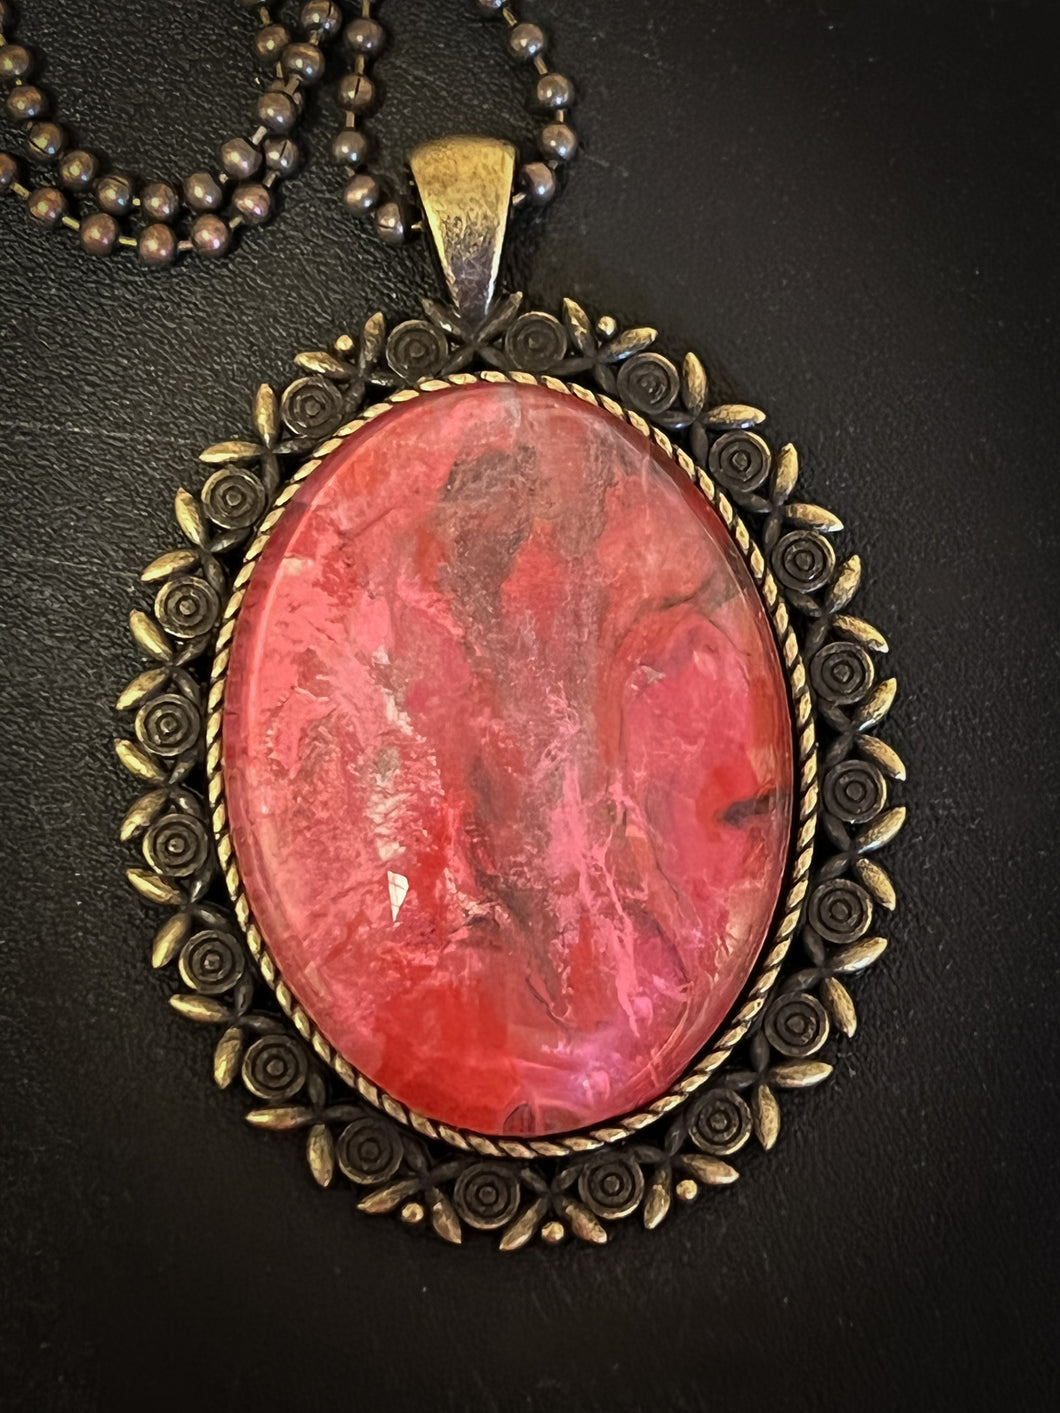 Pendant ball chain necklace in red and pink with antique brass finish